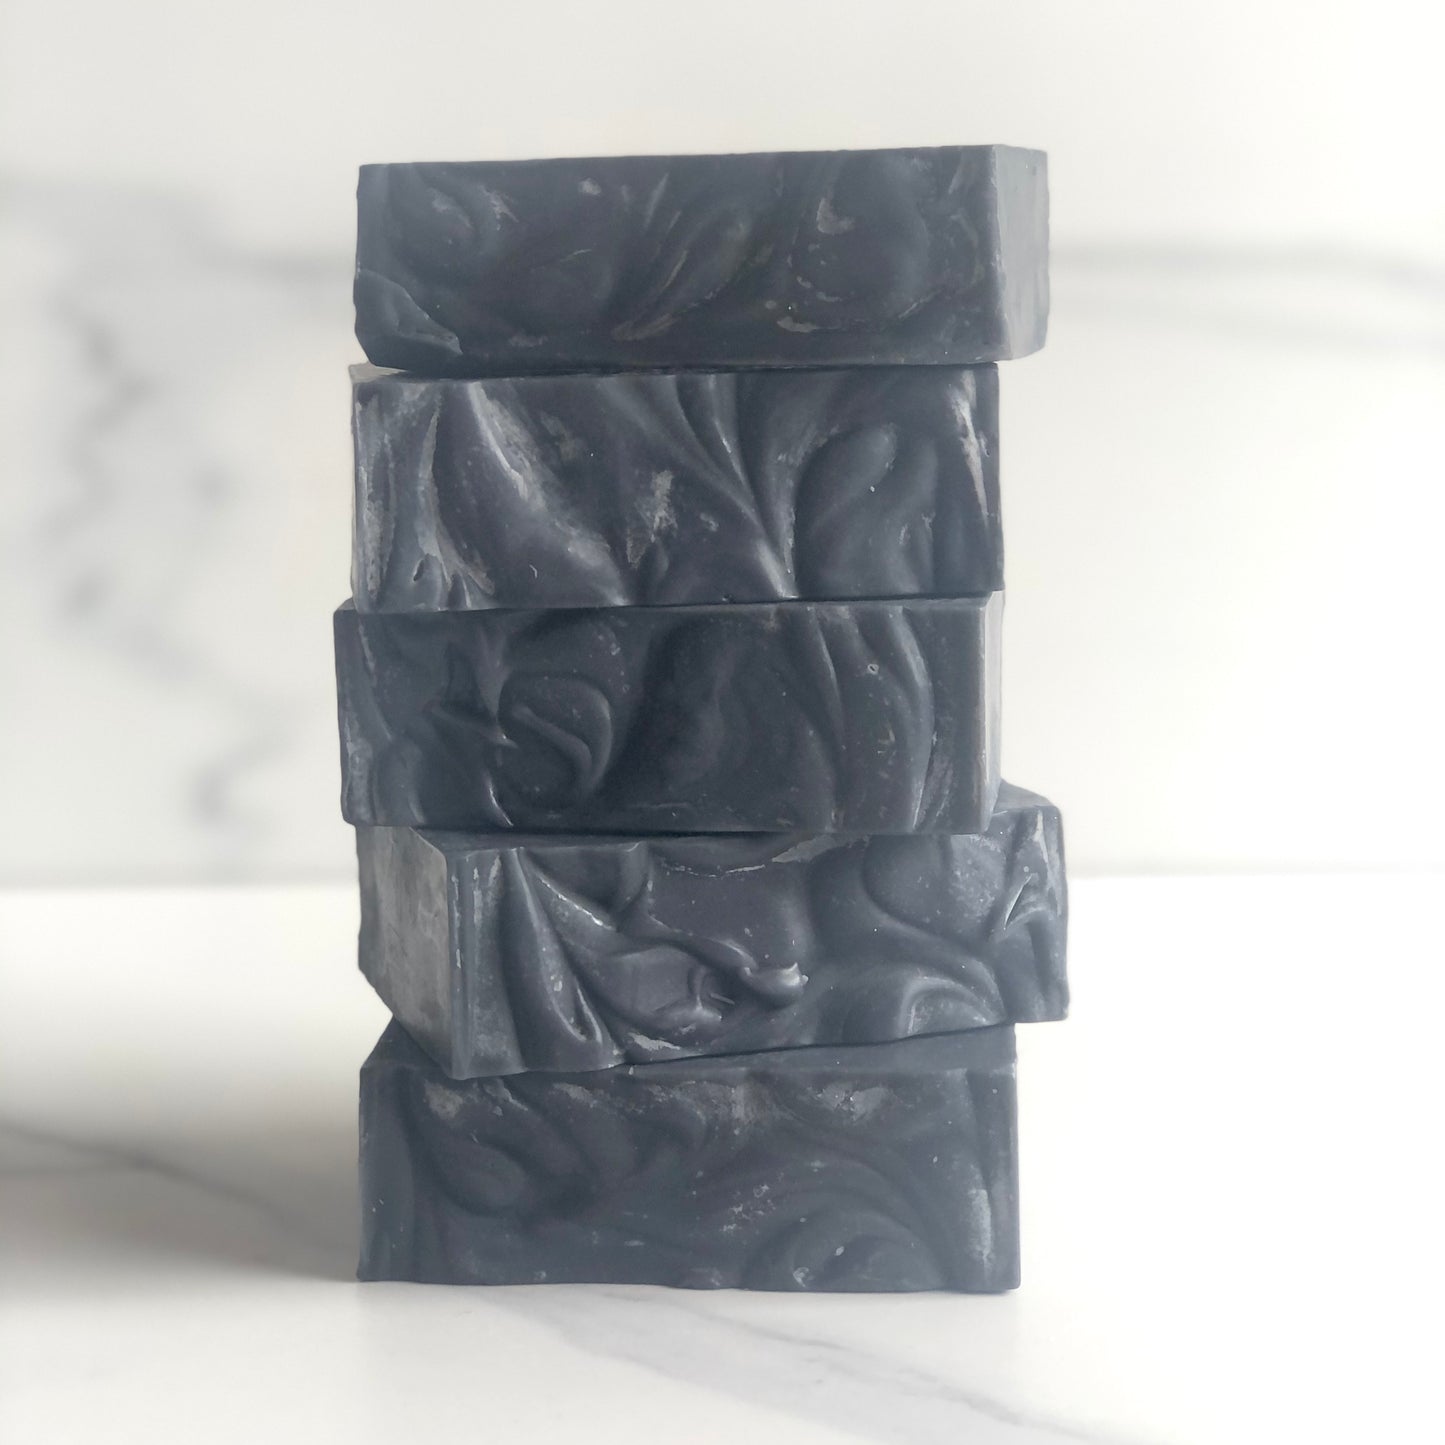 Soap bar made with charcoal, lavender, and tea tree essential oil